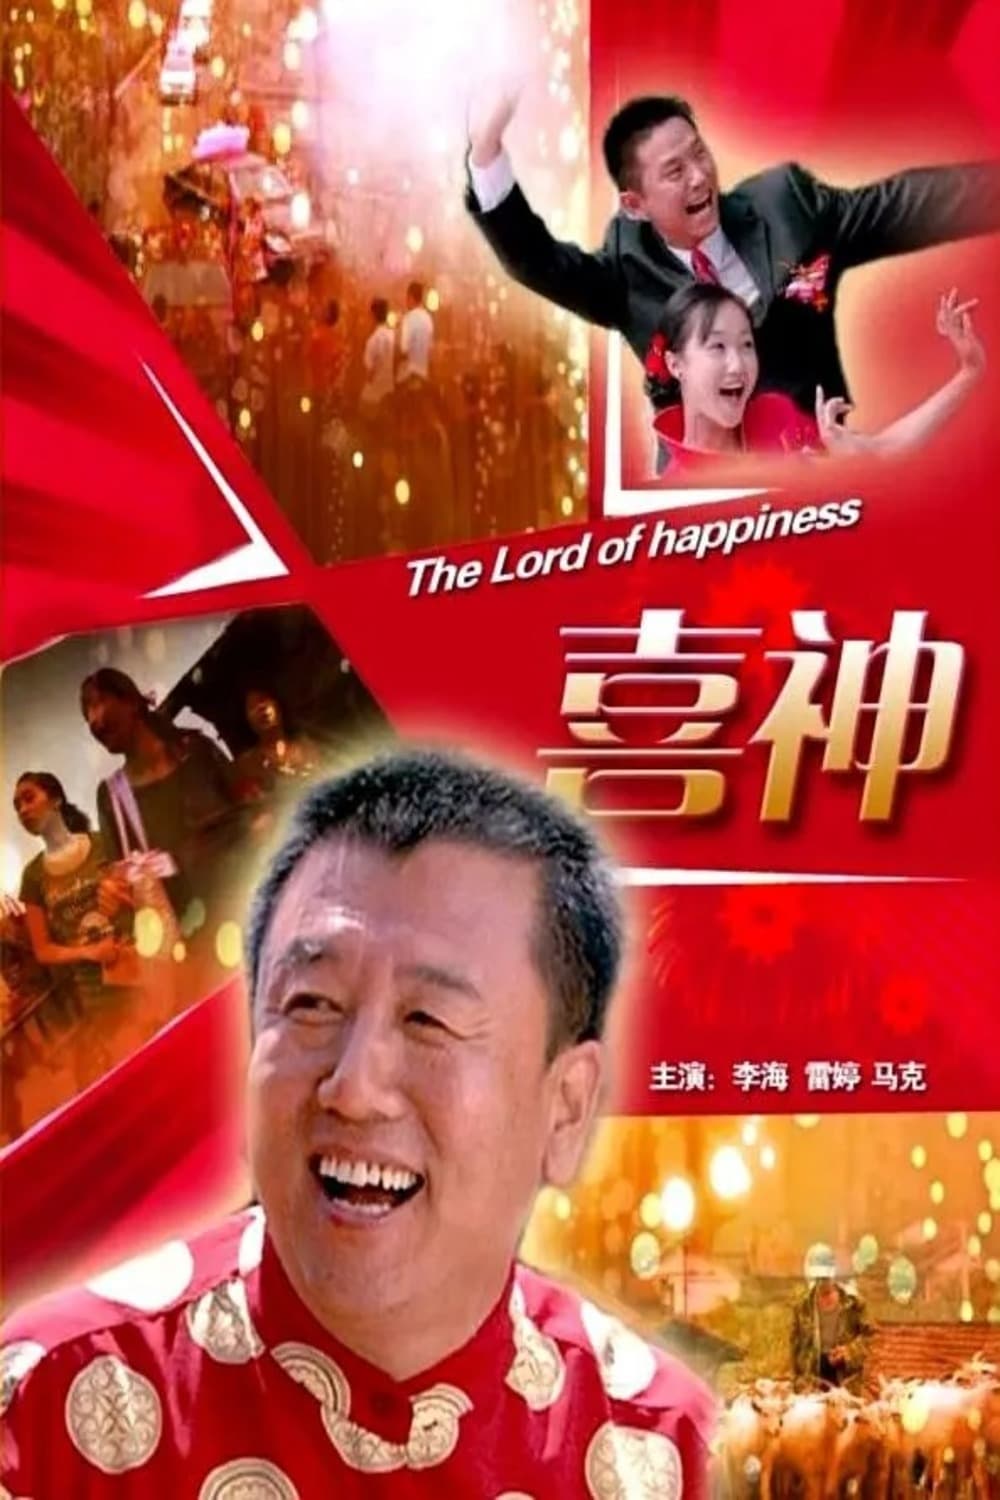 The Lord of Happiness